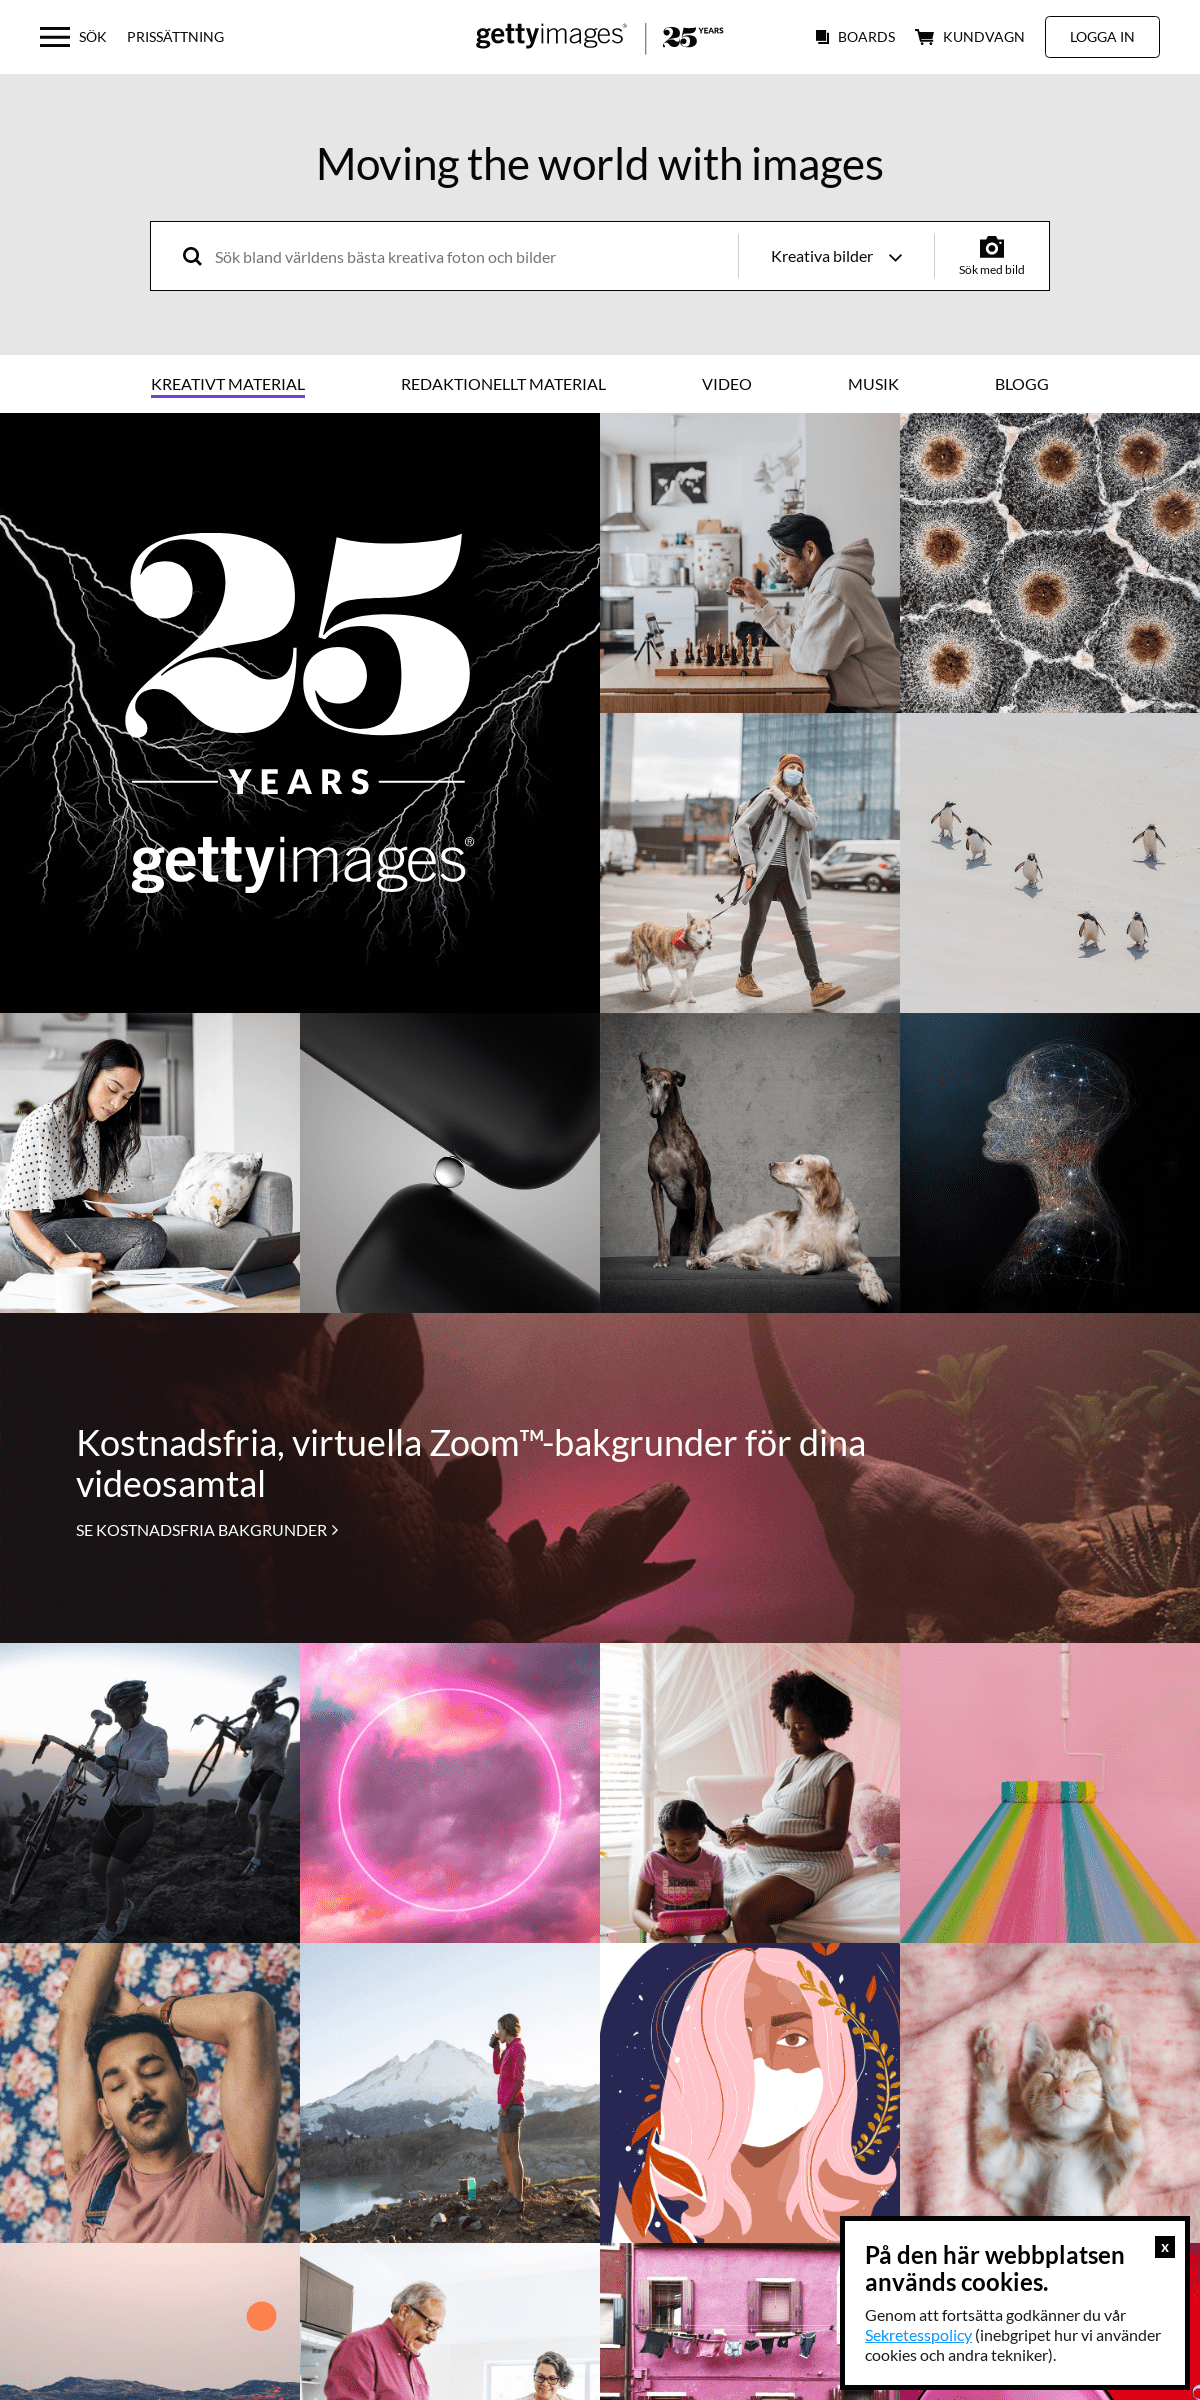 A complete backup of gettyimages.se